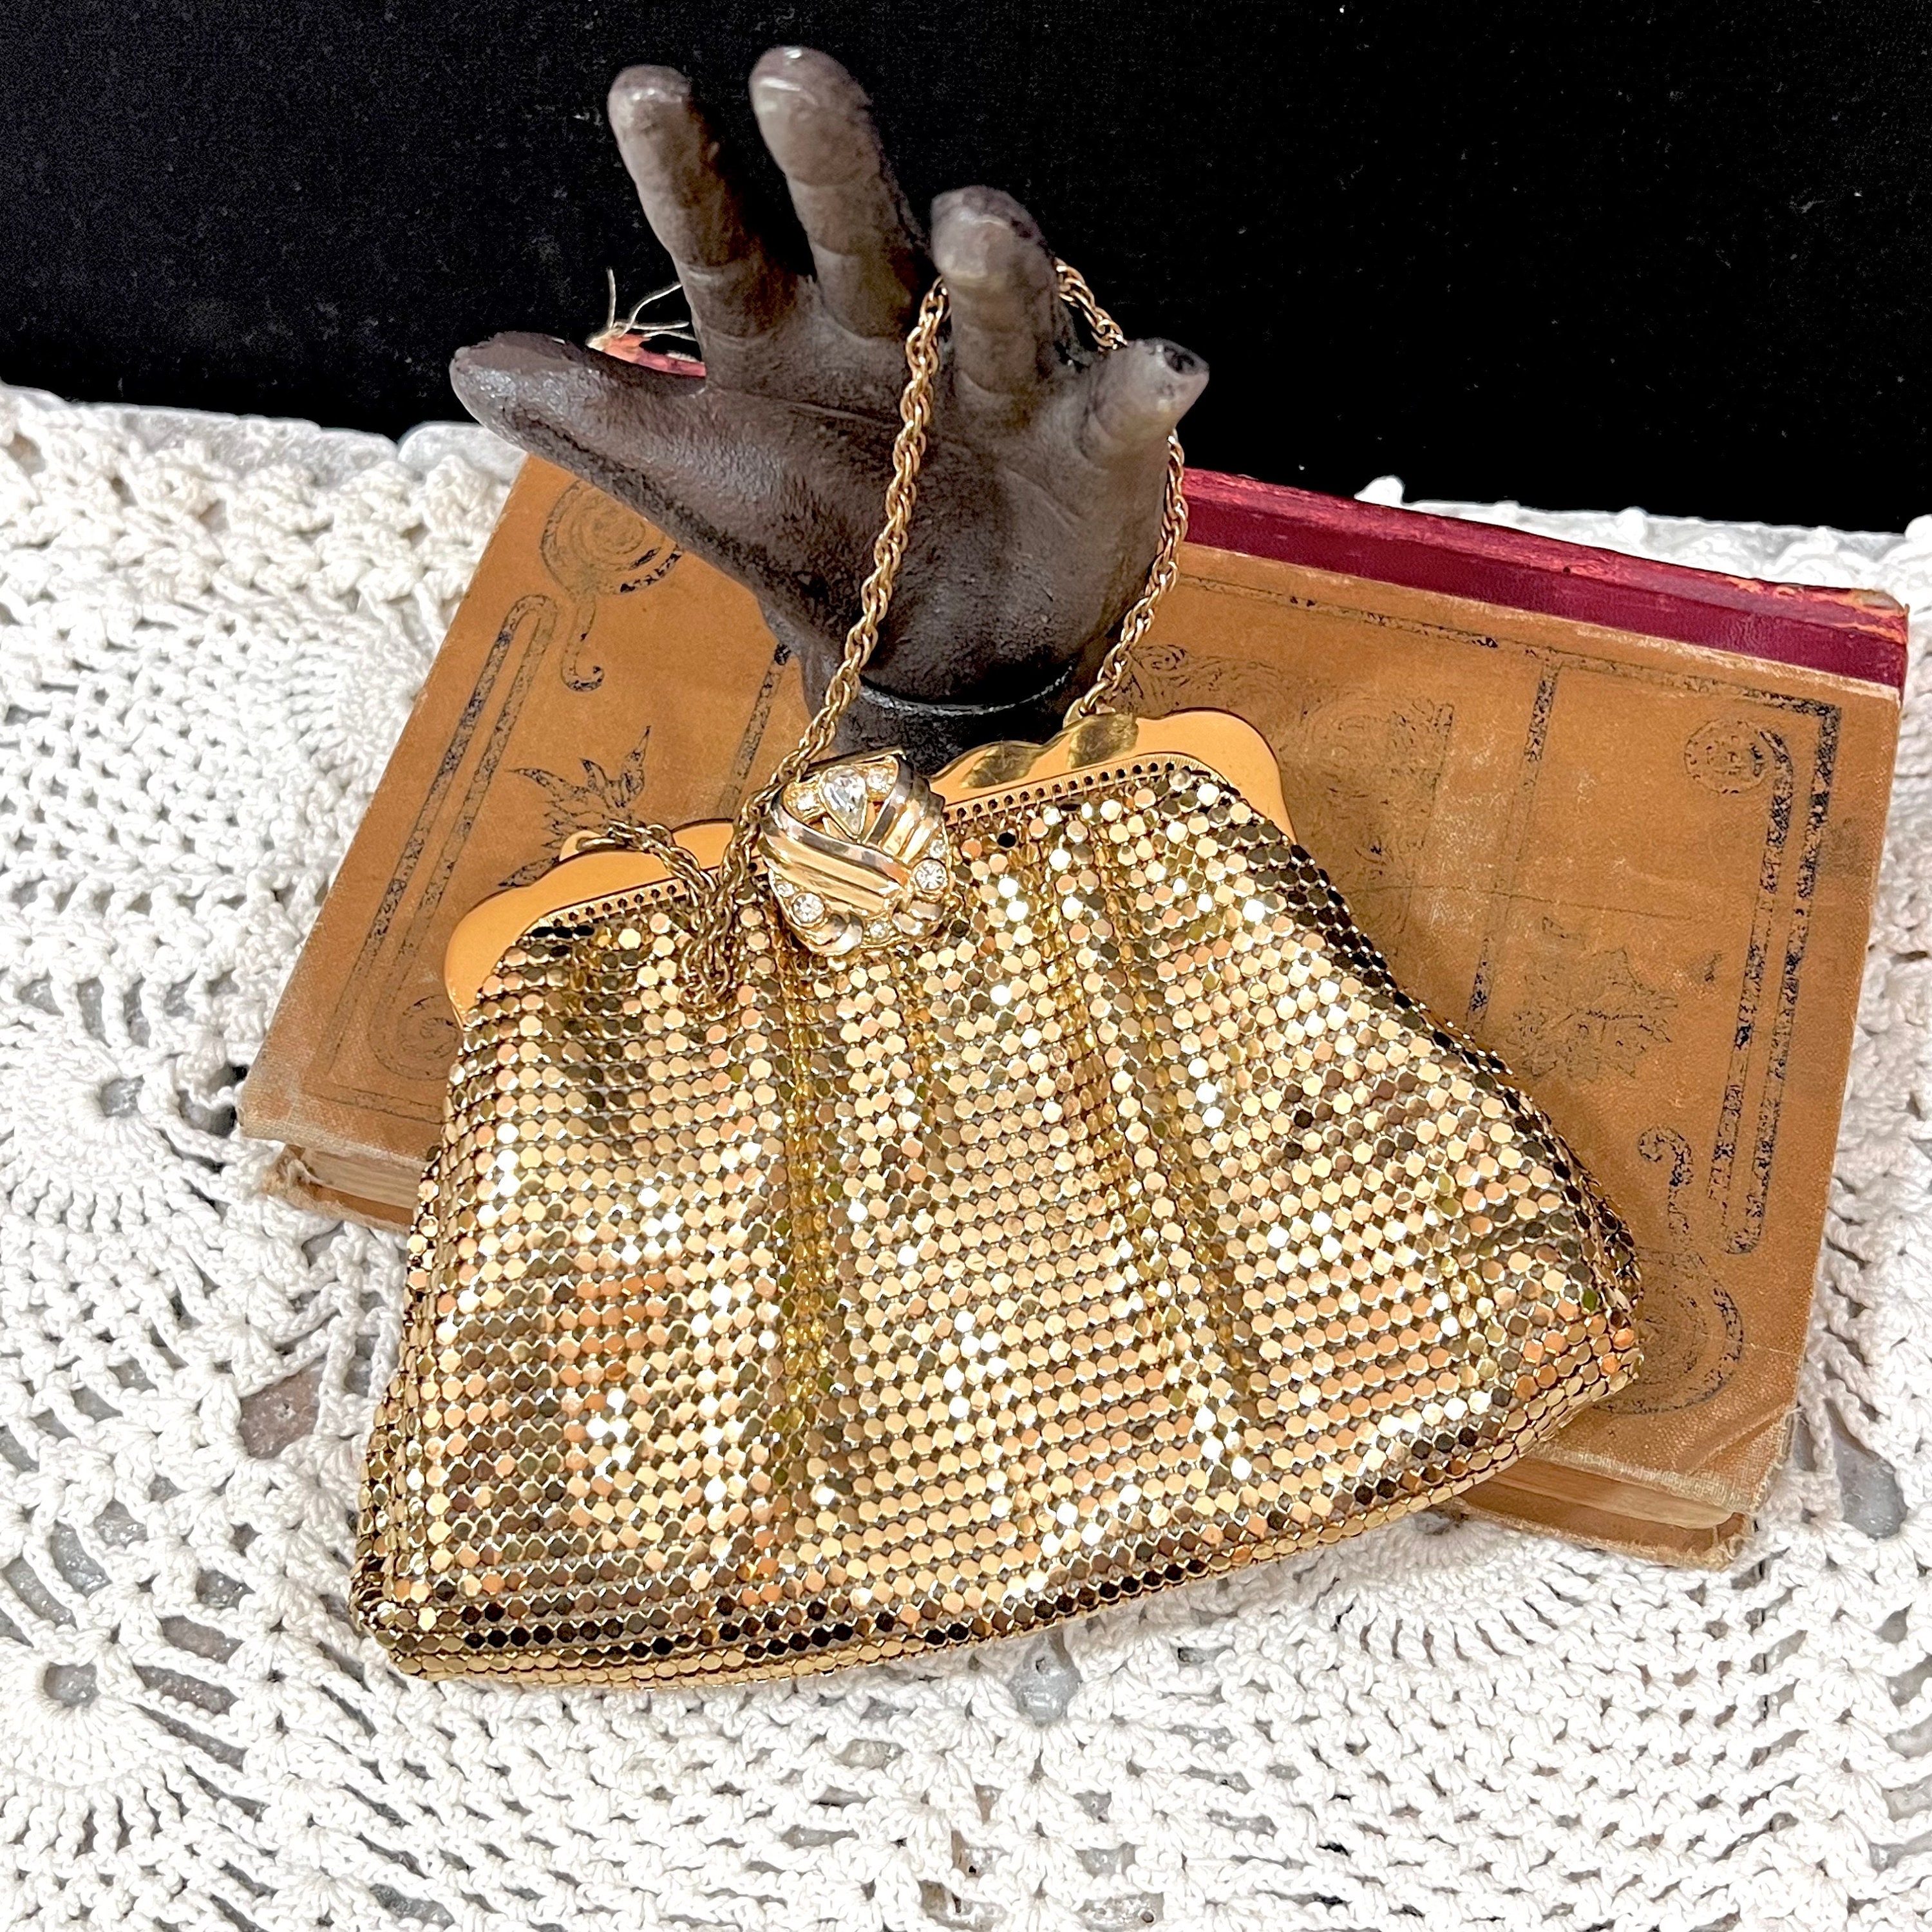 Vintage 1930s Gold Mesh Clutch or Larger Coin Purse – Toadstool Farm Vintage